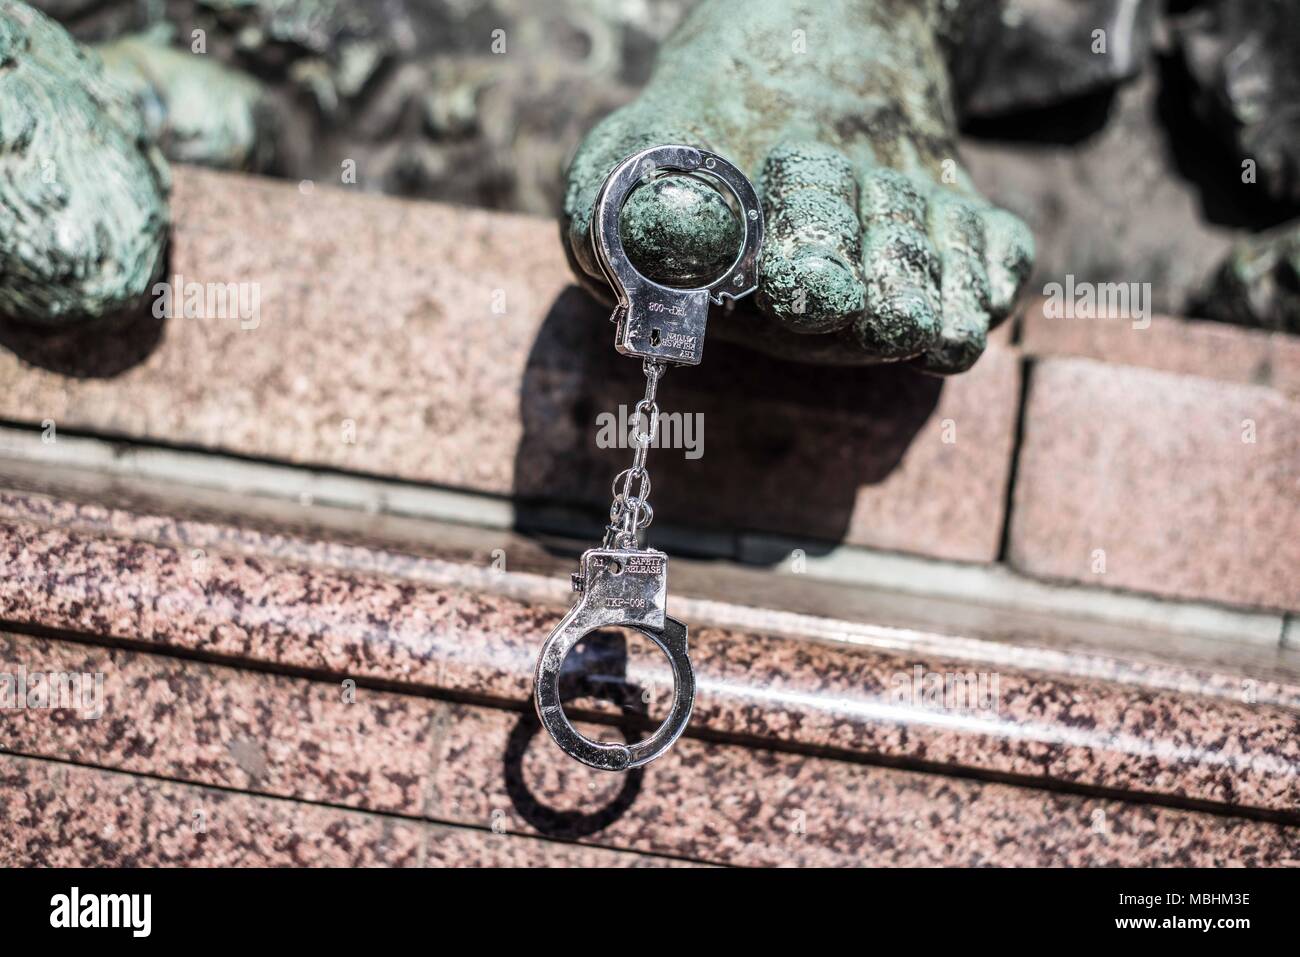 Munich, Bavaria, Germany. 11th Apr, 2018. Handcuffs hanging from the Maxmonument. The Green Party Youth (Gruene Jugend) of Munich, along with 120 members of the SPD, JuSos, Mut Bayern, and die Linke demonstrated against the forthcoming PAG, Police Assignment Laws that give police in Bavaria sweeping secret police-like powers that are alleged to be threats to Germany's model democracy. The CSU party claims the PAG is to protect democracy. The Green Party has threatened complaints based on violations of Germany's Constitution. Credit: ZUMA Press, Inc./Alamy Live News Stock Photo